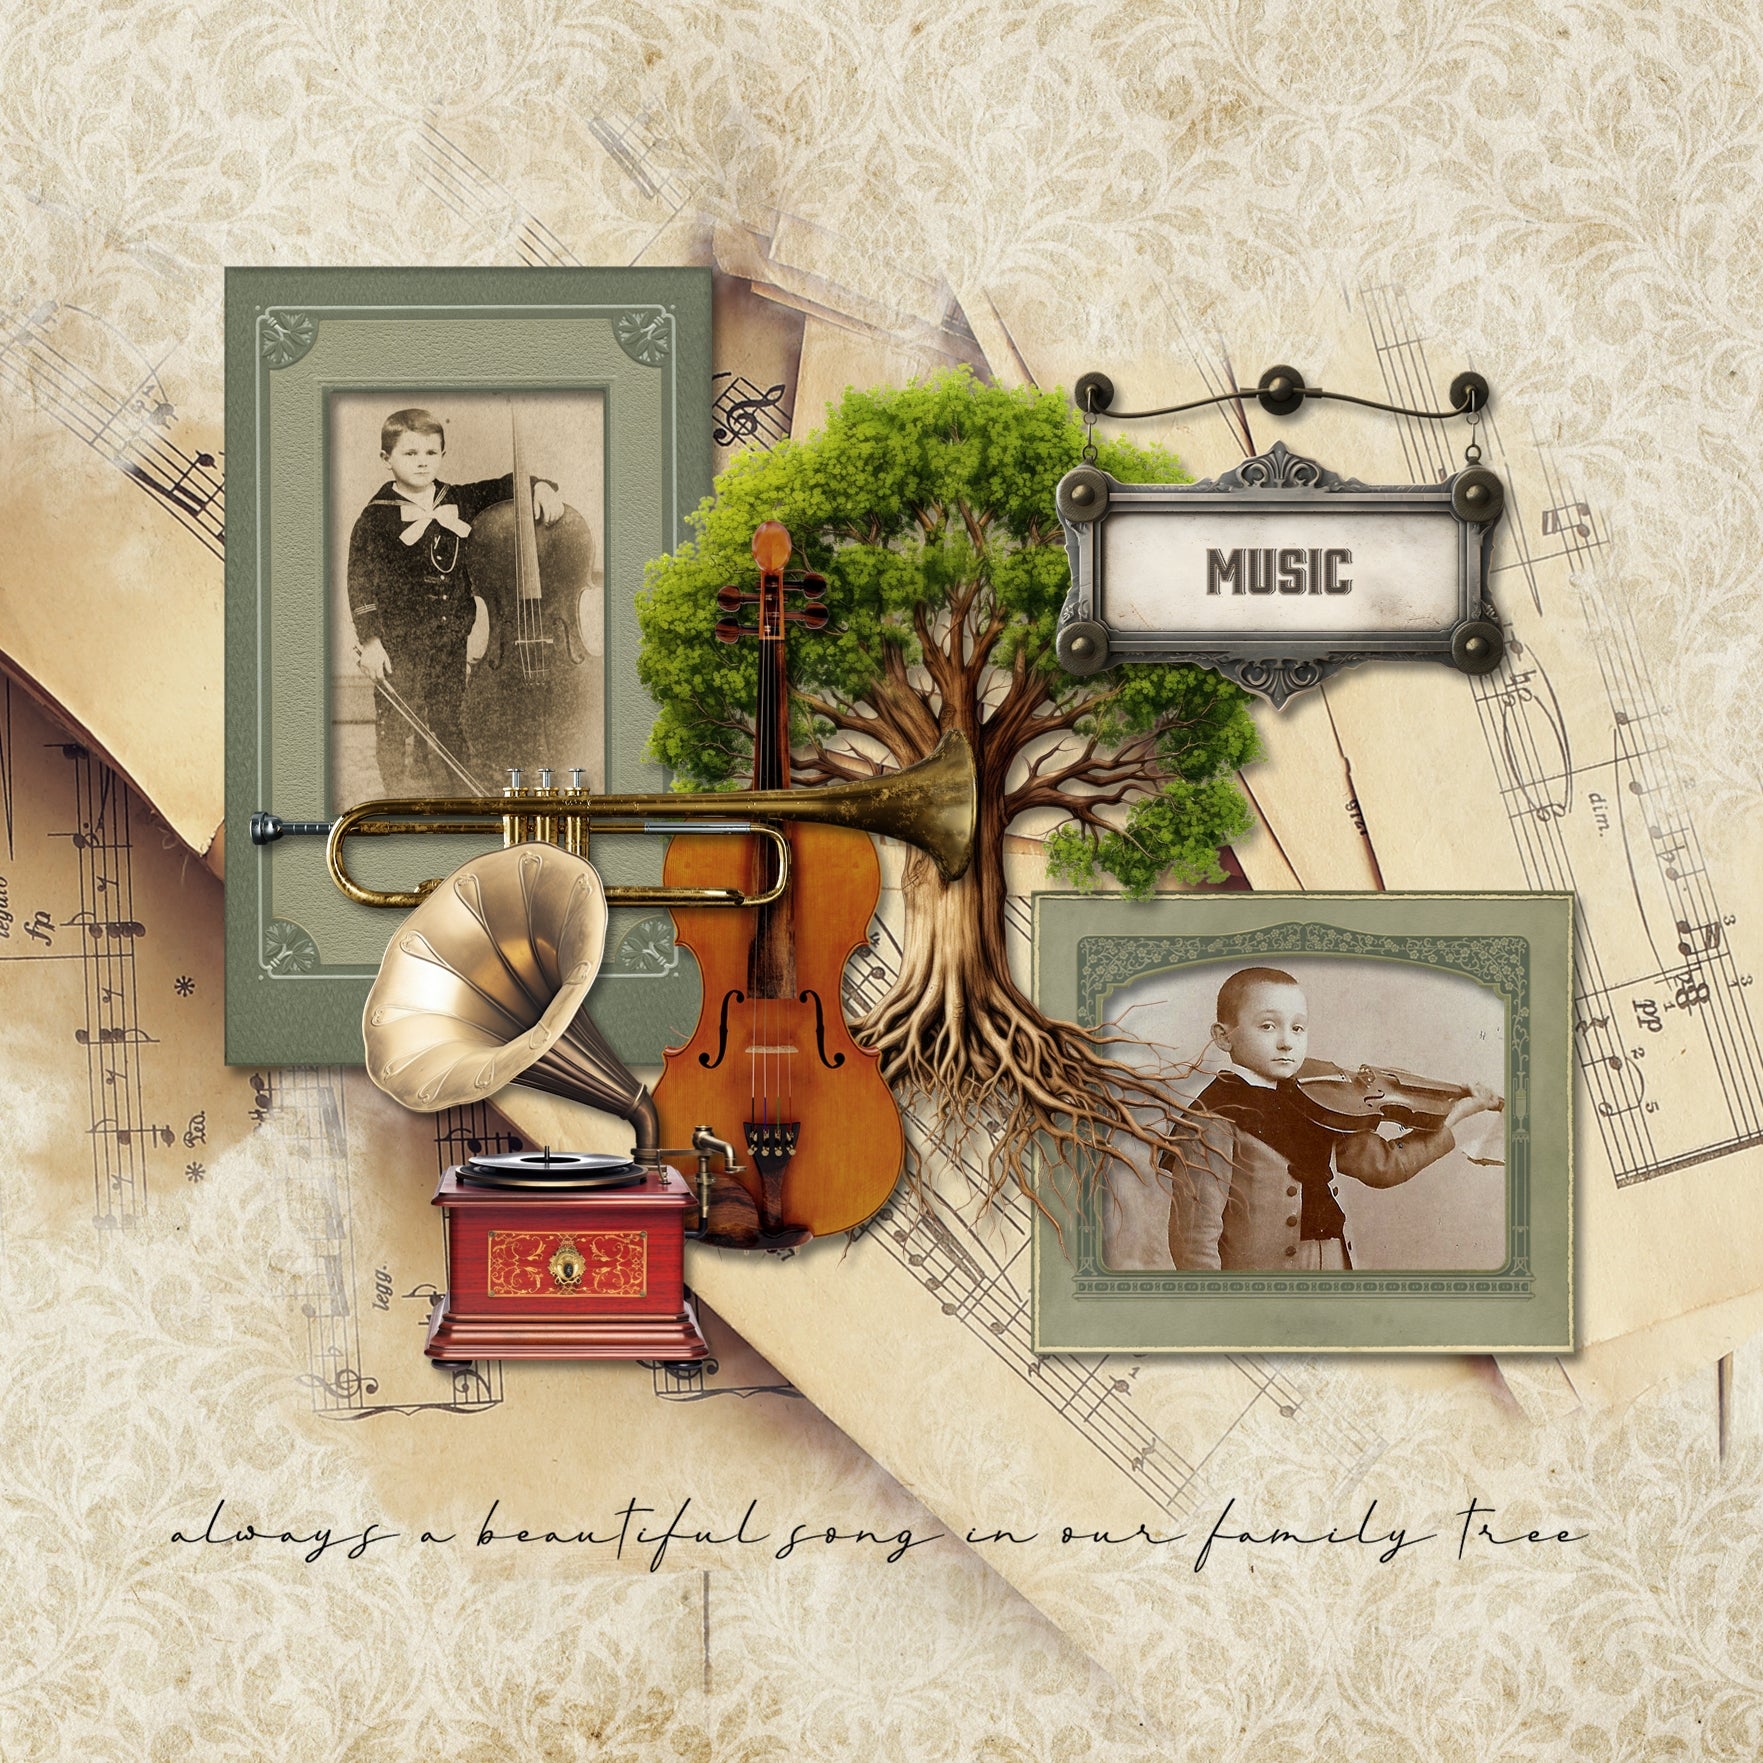 Great for genealogy and family history albums and keepsake digital art pages, these beautiful vintage music sheets and instrument overlays with transparent edges by Lucky Girl Creative blend seamlessly into any background paper and make the perfect backdrop for authentic scrapbook pages. Overlays include vintage sheets of music, piano keys, flute, trumpet, violin, viola, French horn, and brass instruments.